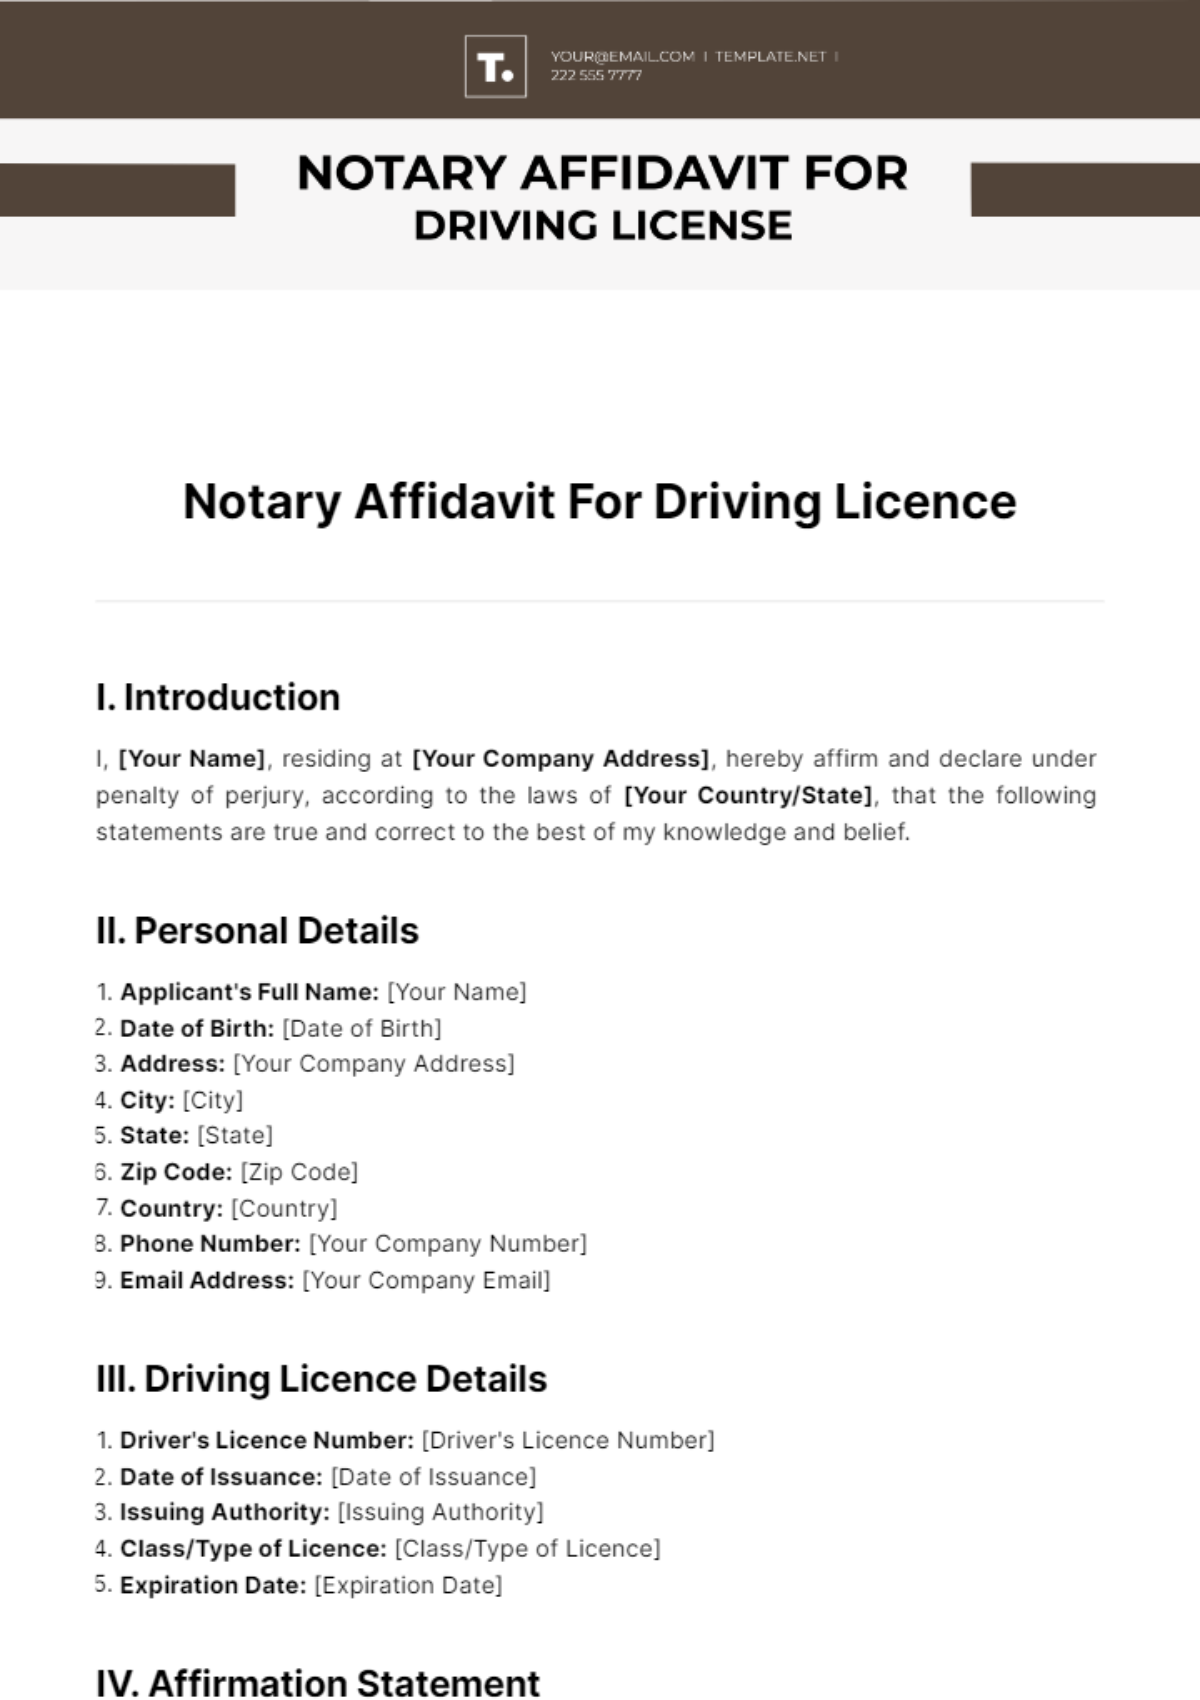 Free Notary Affidavit For Driving Licence Template